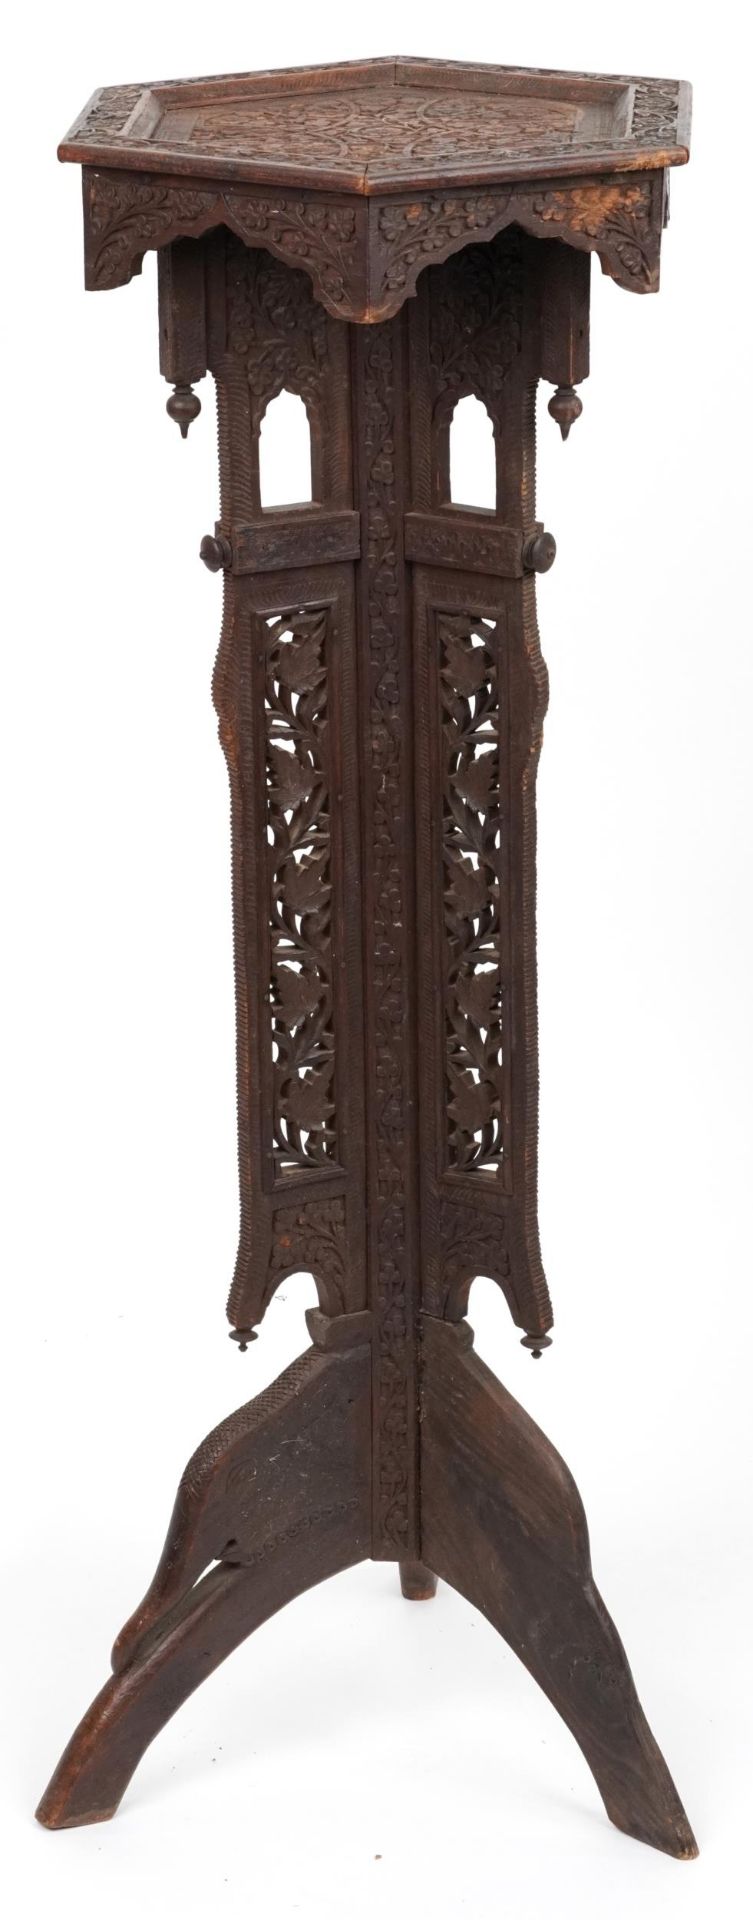 Anglo Indian plant stand profusely carved with flowers and foliage, 100cm high - Image 3 of 3